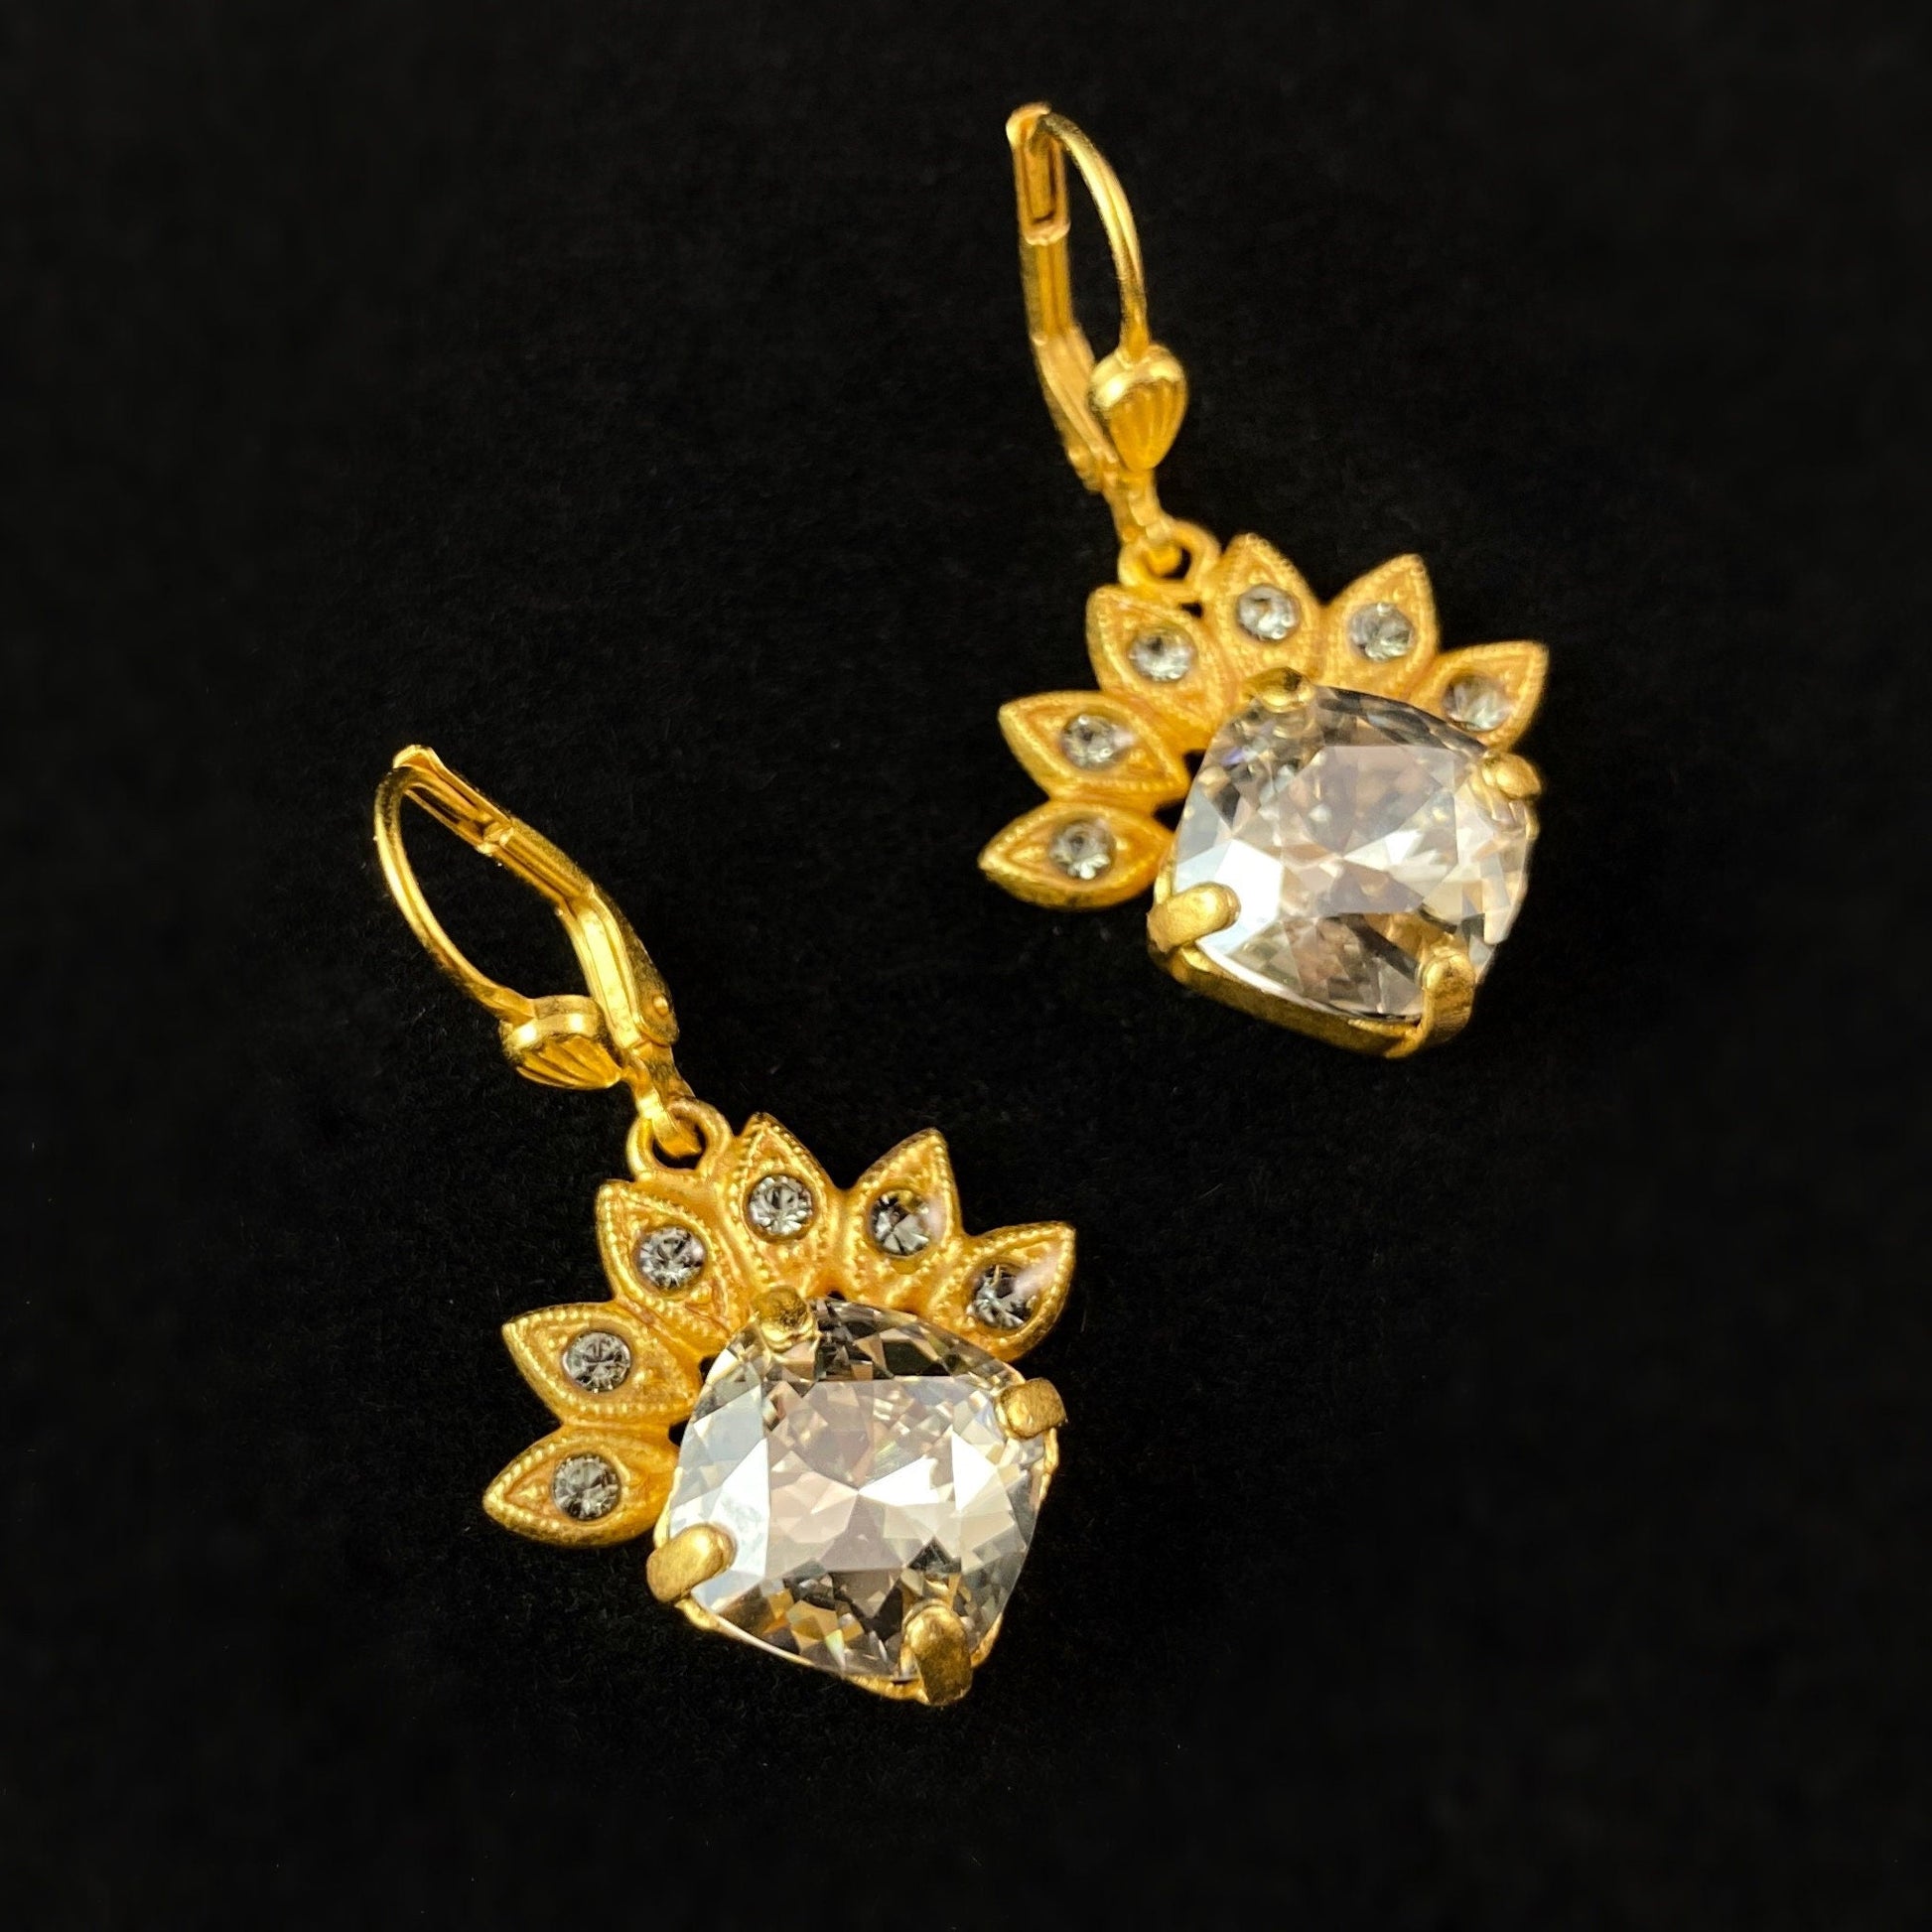 White Triangle Swarovski Crystal Drop Earrings with Floral Crown Detailing- La Vie Parisienne by Catherine Popesco